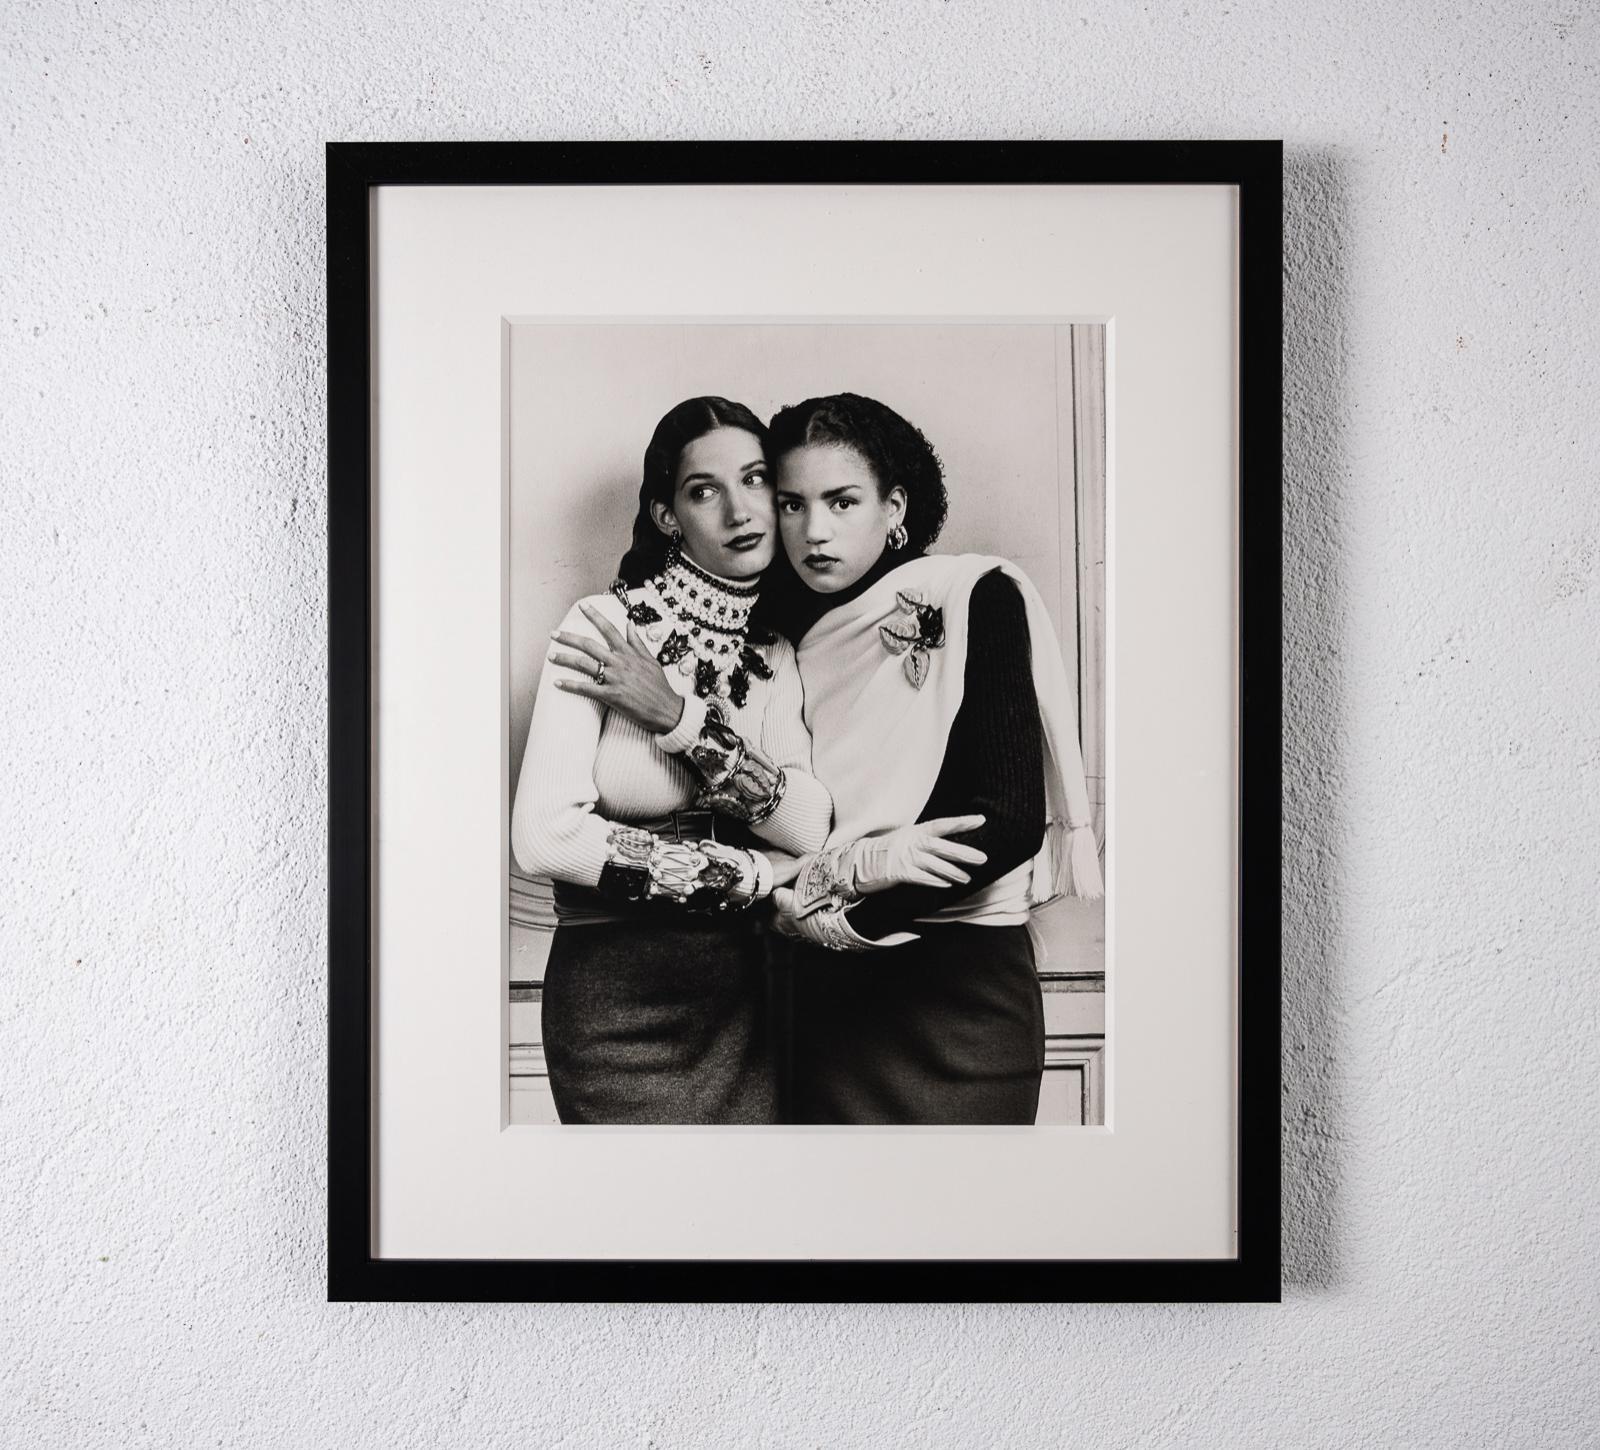 Original silver gelatin print of the models Marpessa and Veronica Webb from Lagerfeld’s studio,
ex-collection Eric Wright - Lagerfeld’s right hand man in the 1980s-90s, Paris, circa 1990s

Framed size: 47cm W x 57cm H, window size: 29cm W x 39cm